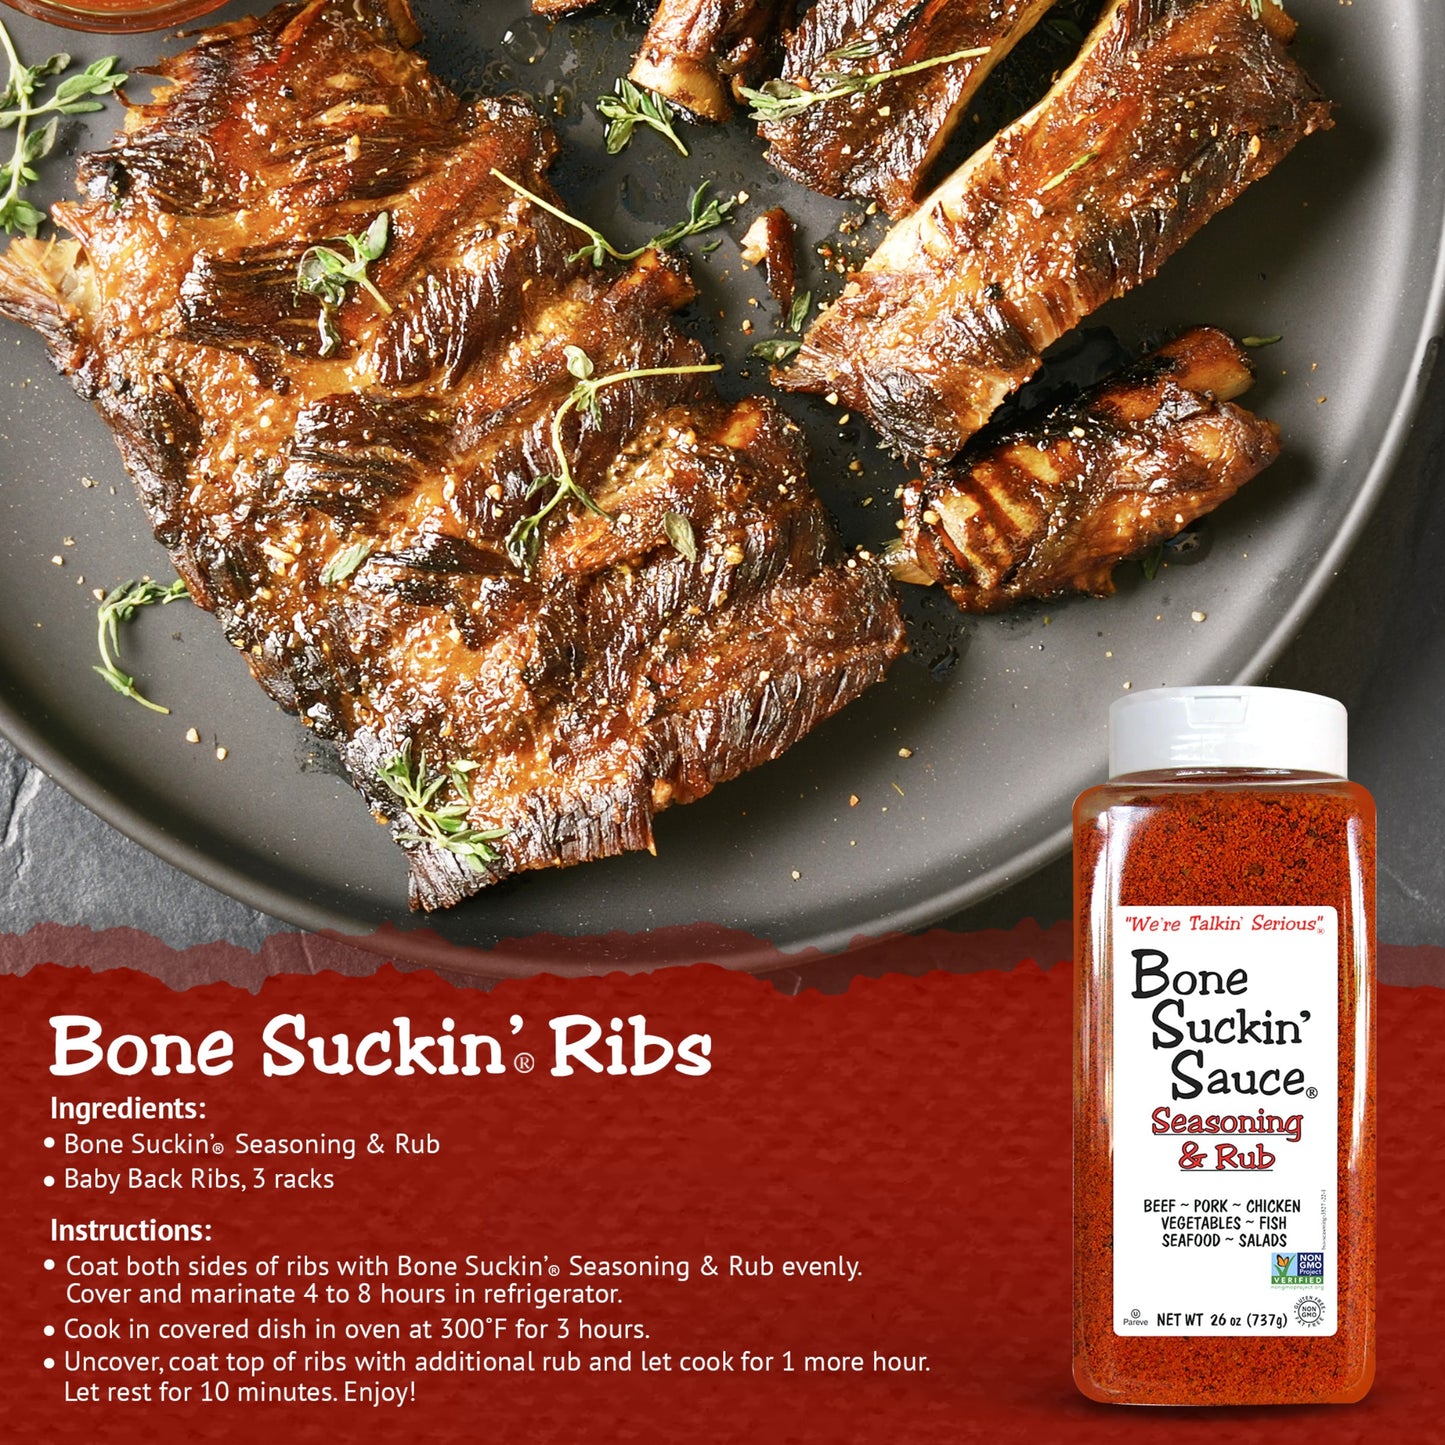 Bone Suckin' Ribs Recipe. Ingredients: Bone Suckin Seasoning & Rub, Baby Back Ribs, 3 racks. Instructions: Coat both sides of ribs with Bone Suckin' Seasoning & Rub evenly. Cover and marinate 4 to 8 hours in refrigerator. Cook in covered dish in oven at 300°F for 3 hours. Uncover, coat top of ribs with additional rub and let it cook for 1 hour more. Let rest for 10 minutes. Enjoy!